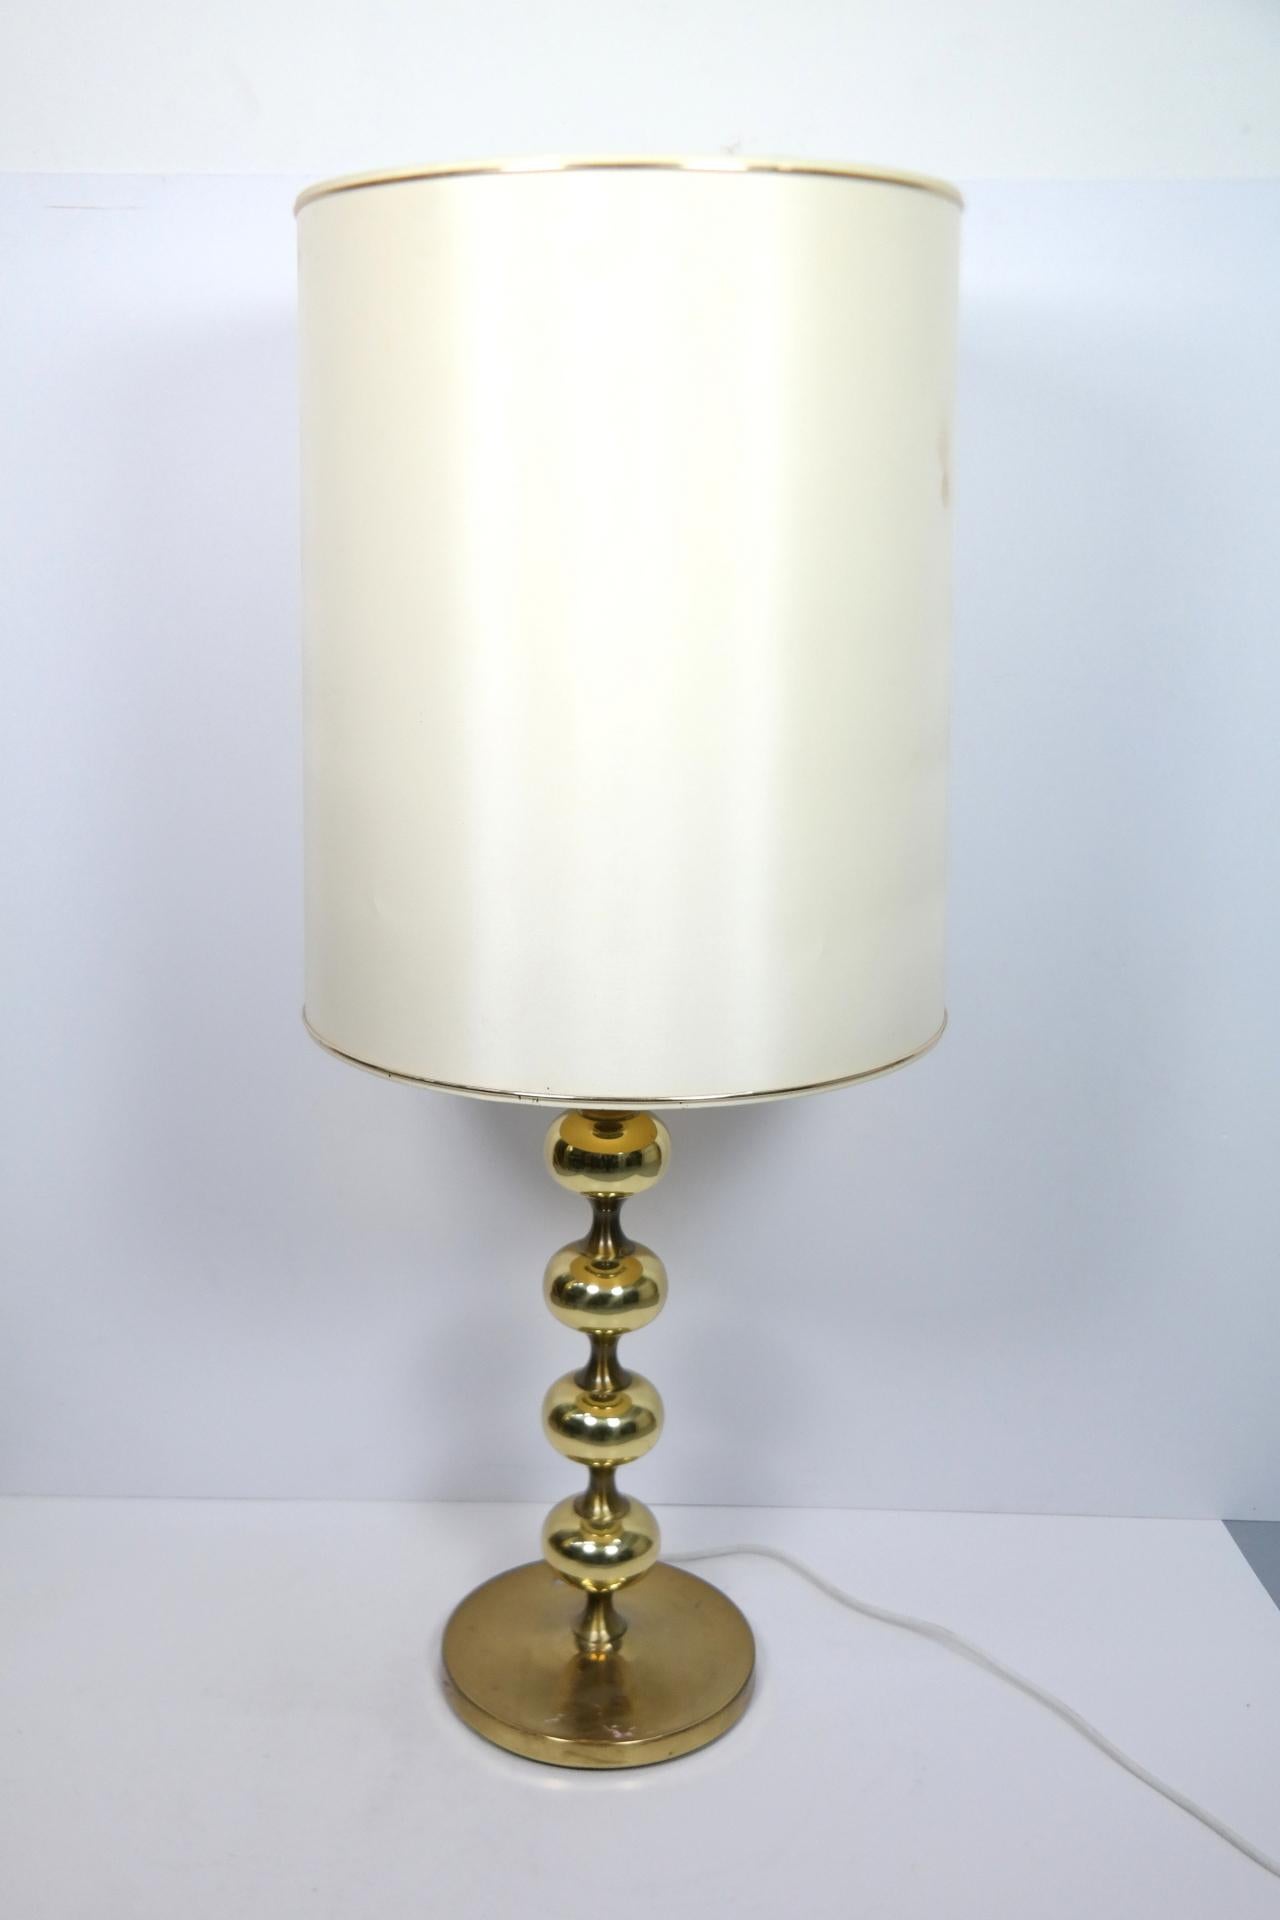 Hollywood Regency style brass table lamp, 1960s. Authentic shade.